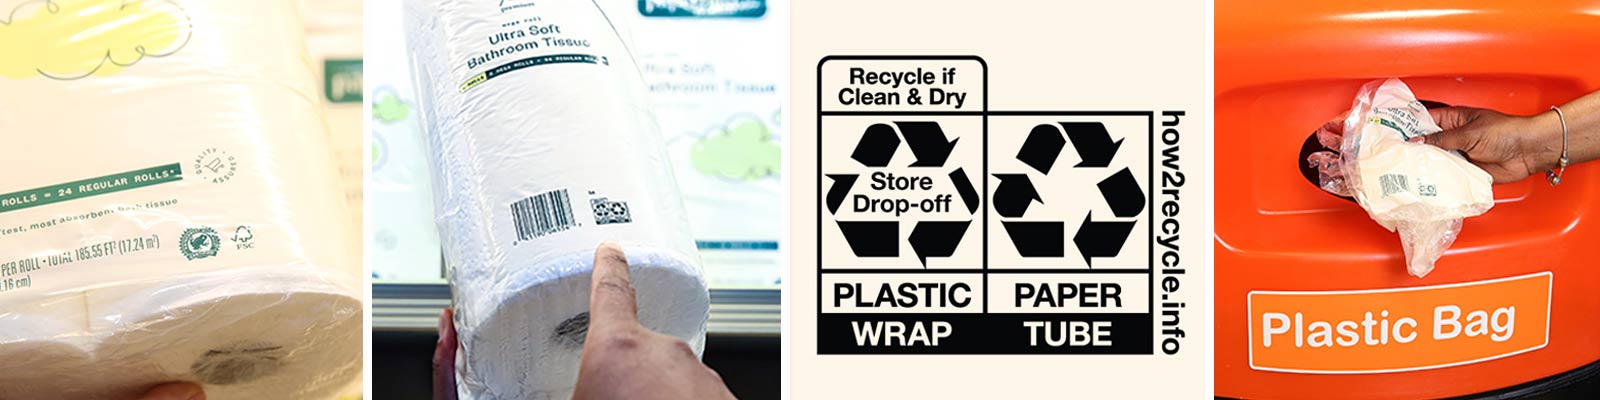 Store Drop-off - How2Recycle